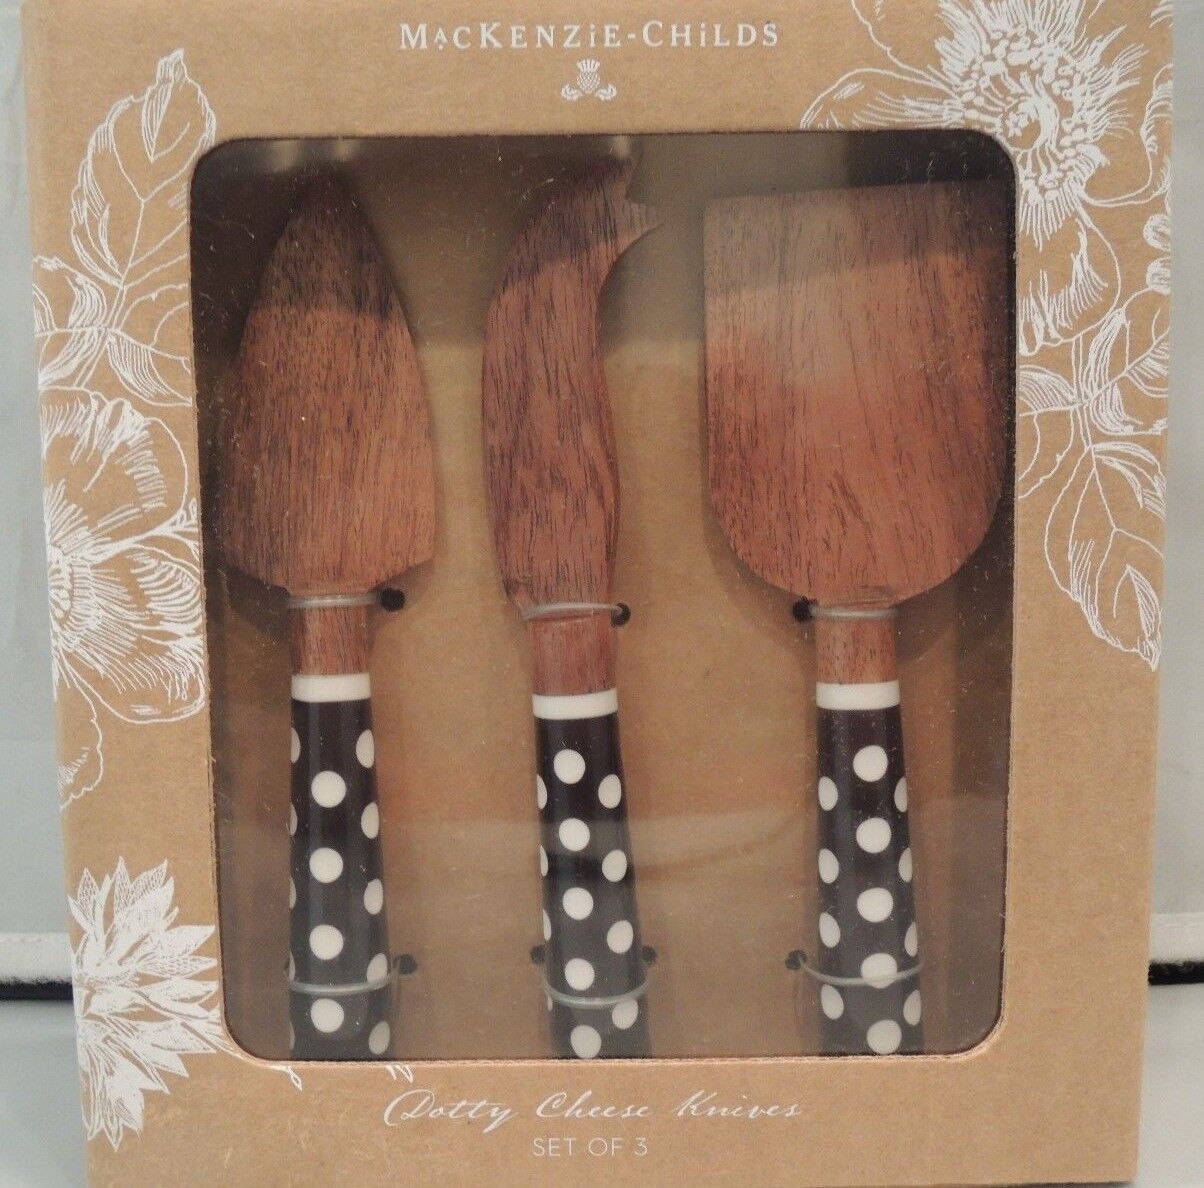  Brand New Mackenzie Childs Dotty Cheese Knives Fast Ship Sale...